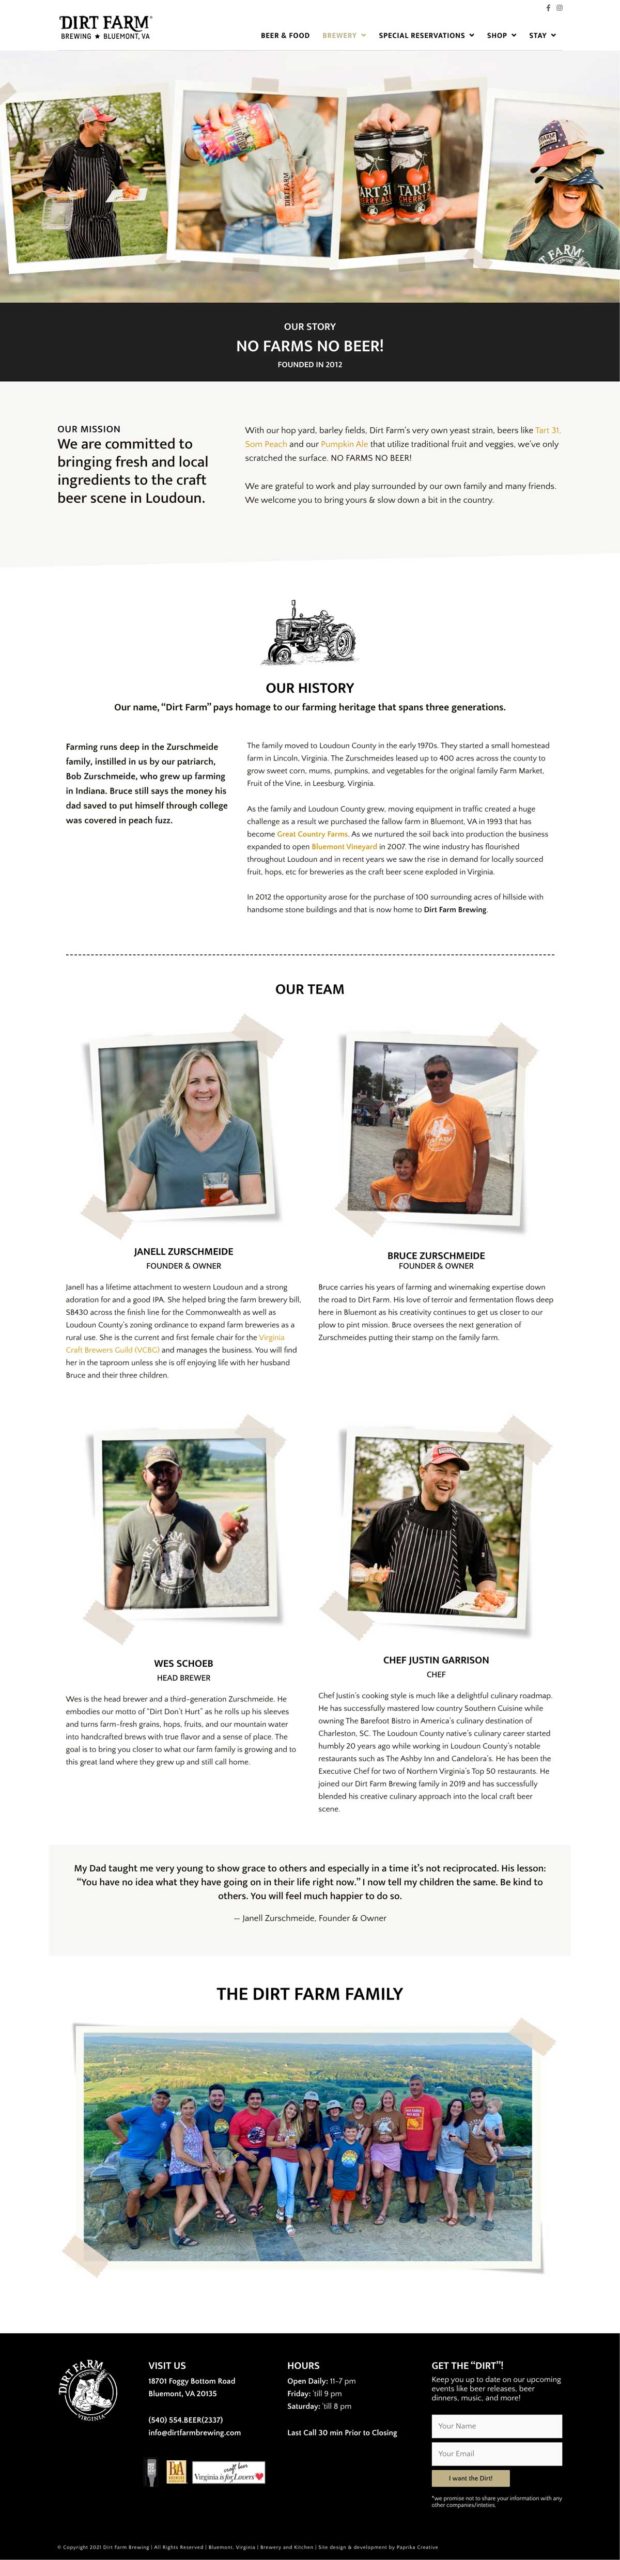 Dirt Farm Brewing Our Story Website Page